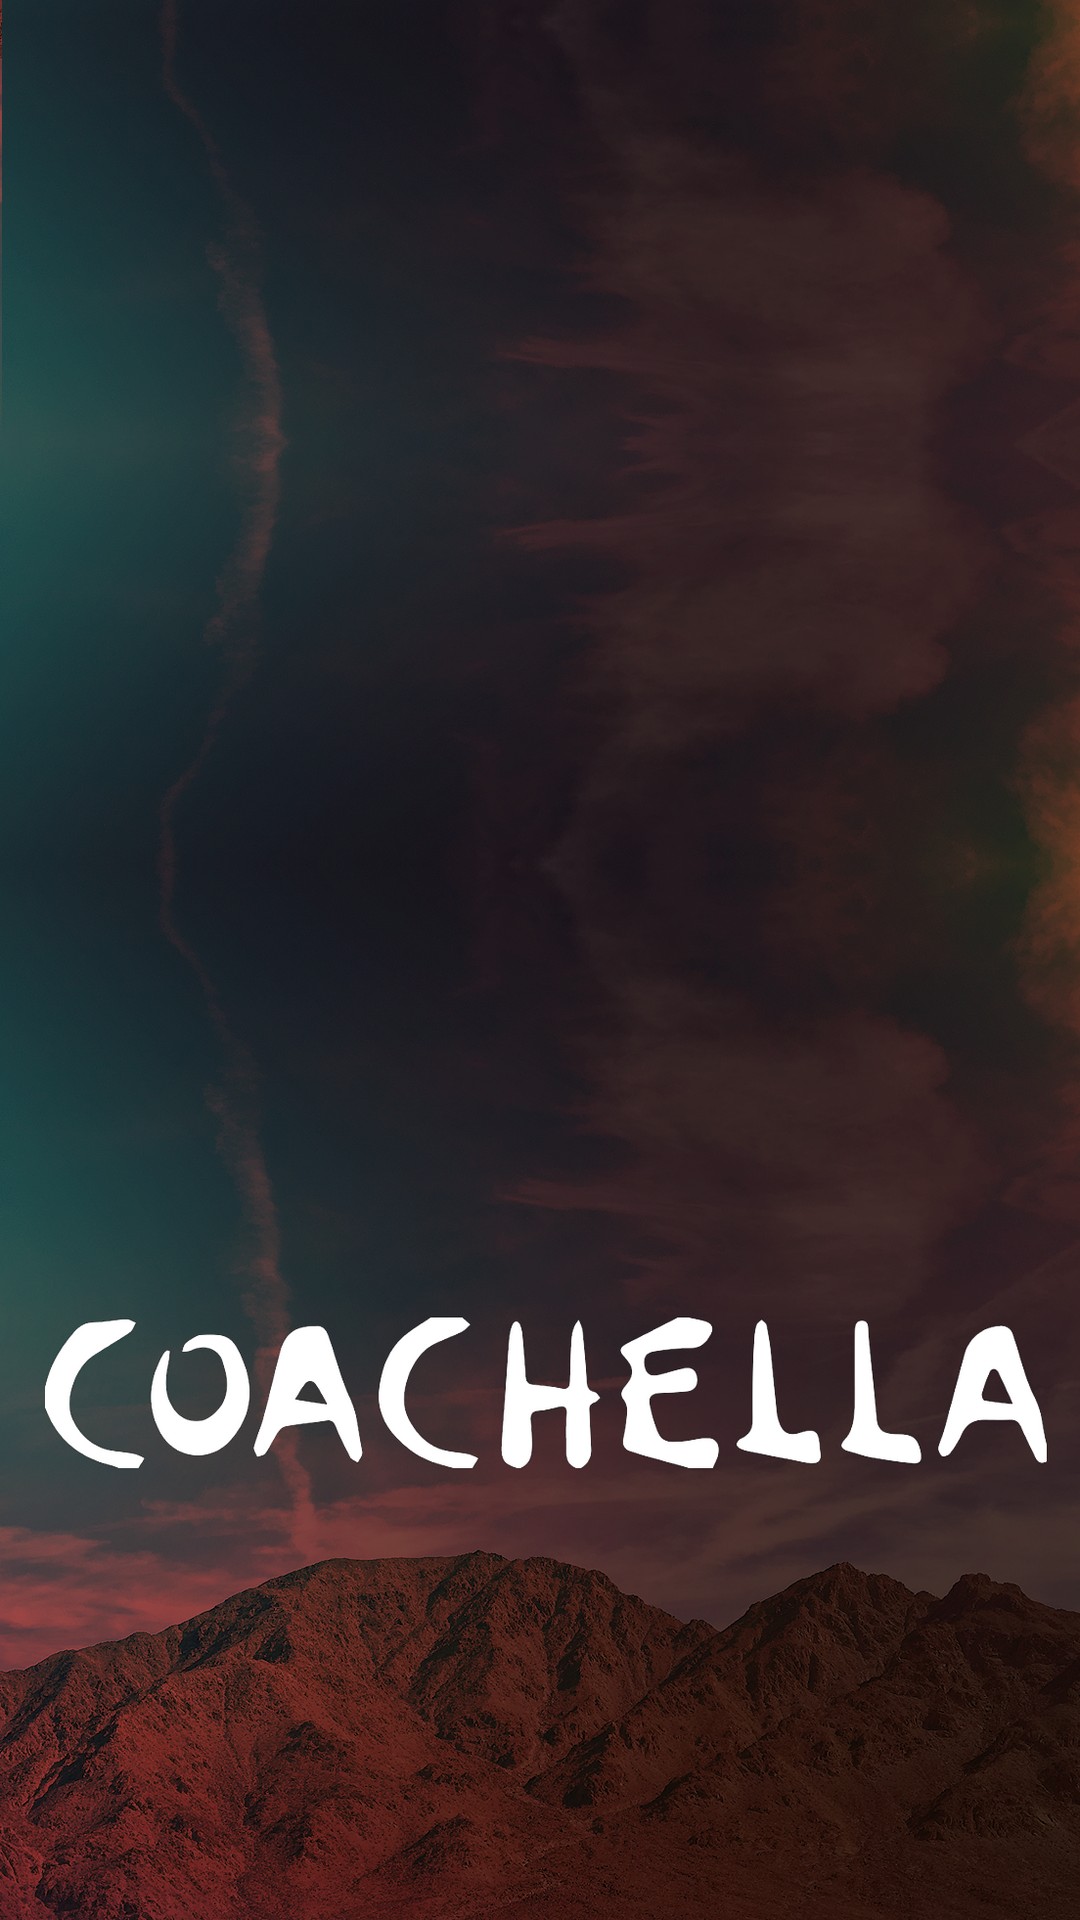 Coachella 2019 iPhone Wallpaper with high-resolution 1080x1920 pixel. You can use this wallpaper for your iPhone 5, 6, 7, 8, X, XS, XR backgrounds, Mobile Screensaver, or iPad Lock Screen